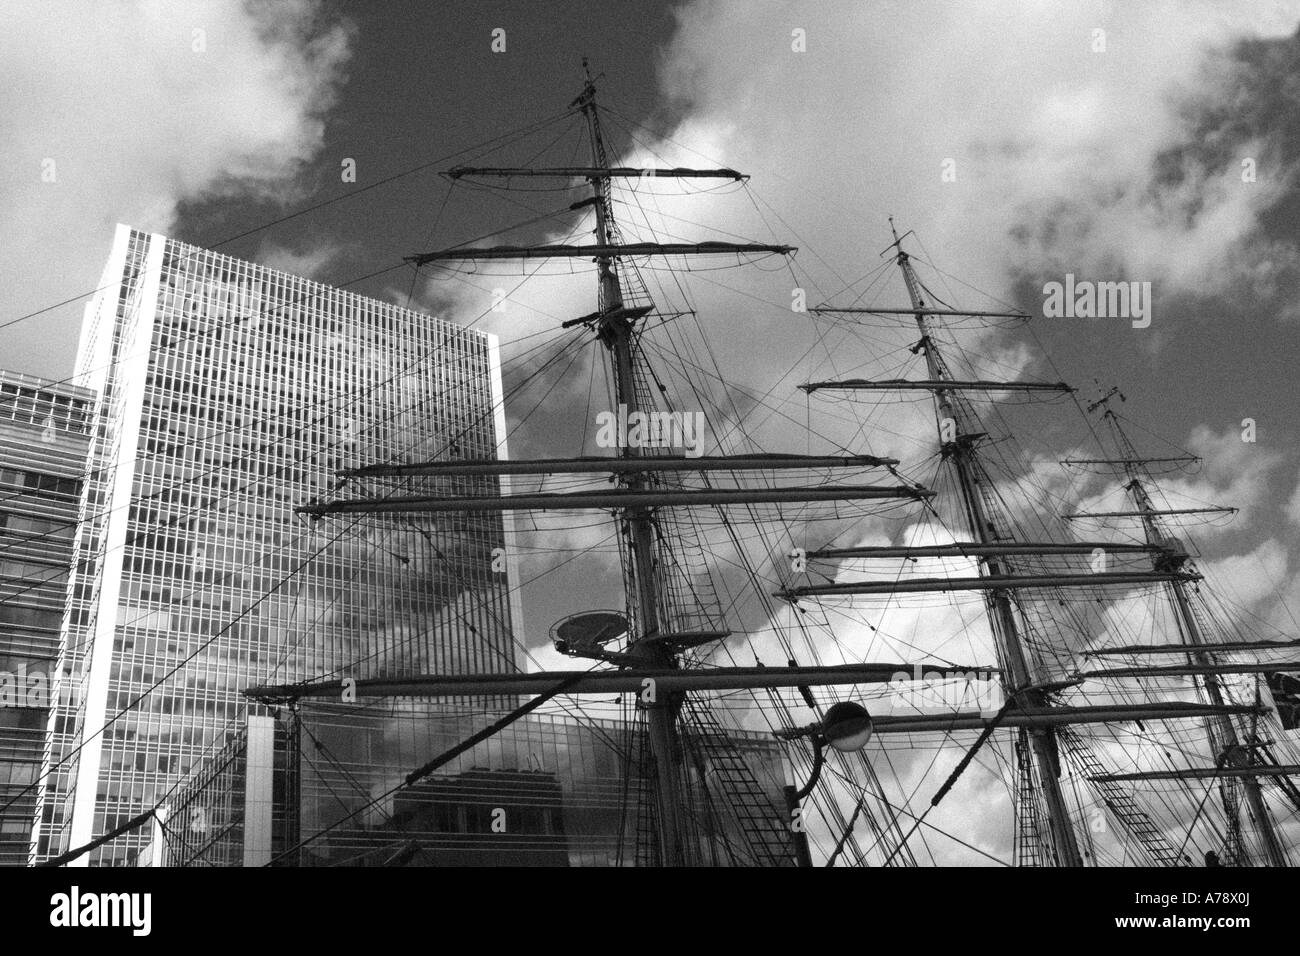 CHRISTIAN RADICH masts, flanked by Docklands skyscrapers in London  Docklands. Monochrome image. Stock Photo